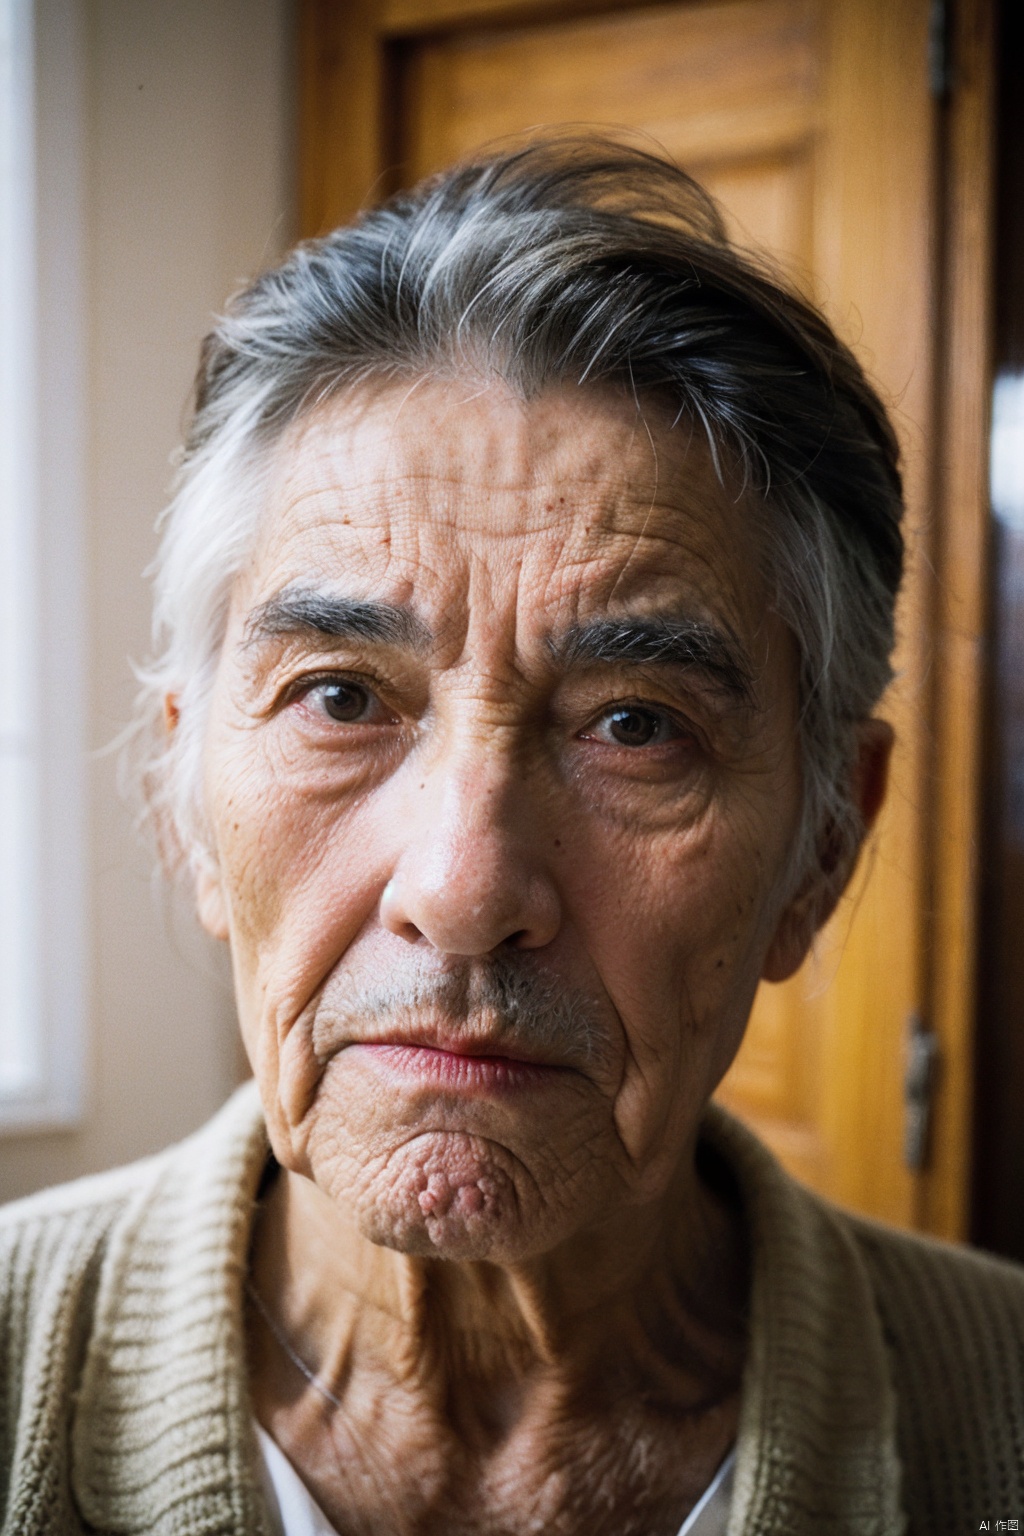  HUBG_Film_Texture, hyperrealism,
photograph of a old handsome man